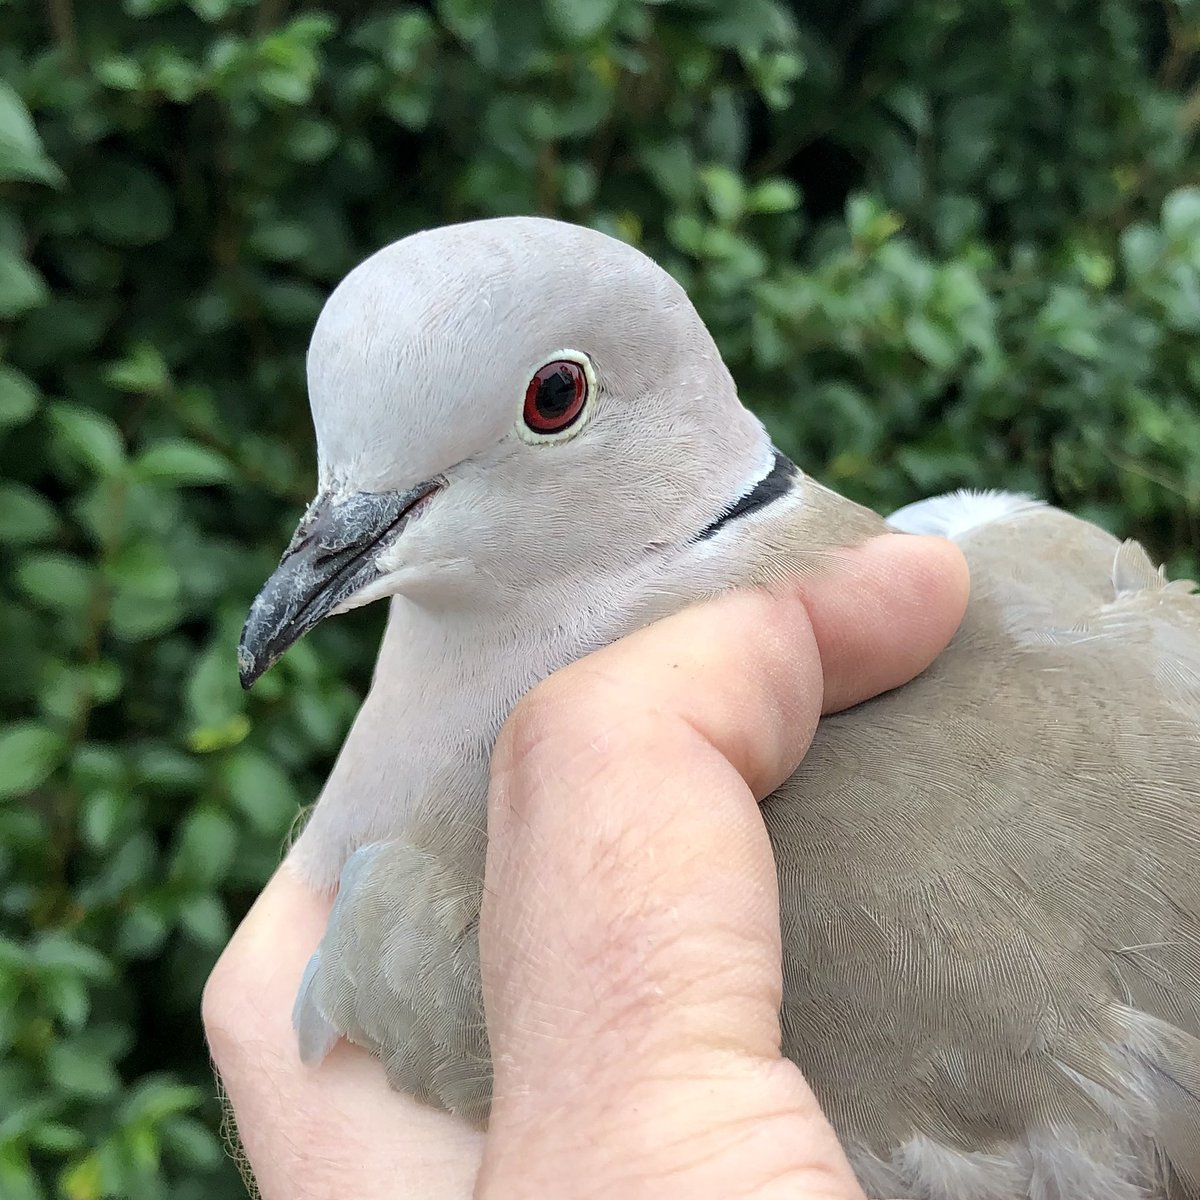 First #CollaredDove of 2022 ringed here today. Last year’s garden ringed total was over double the previous year’s of 20. Will the upward trend continue... #BirdRinging #doves